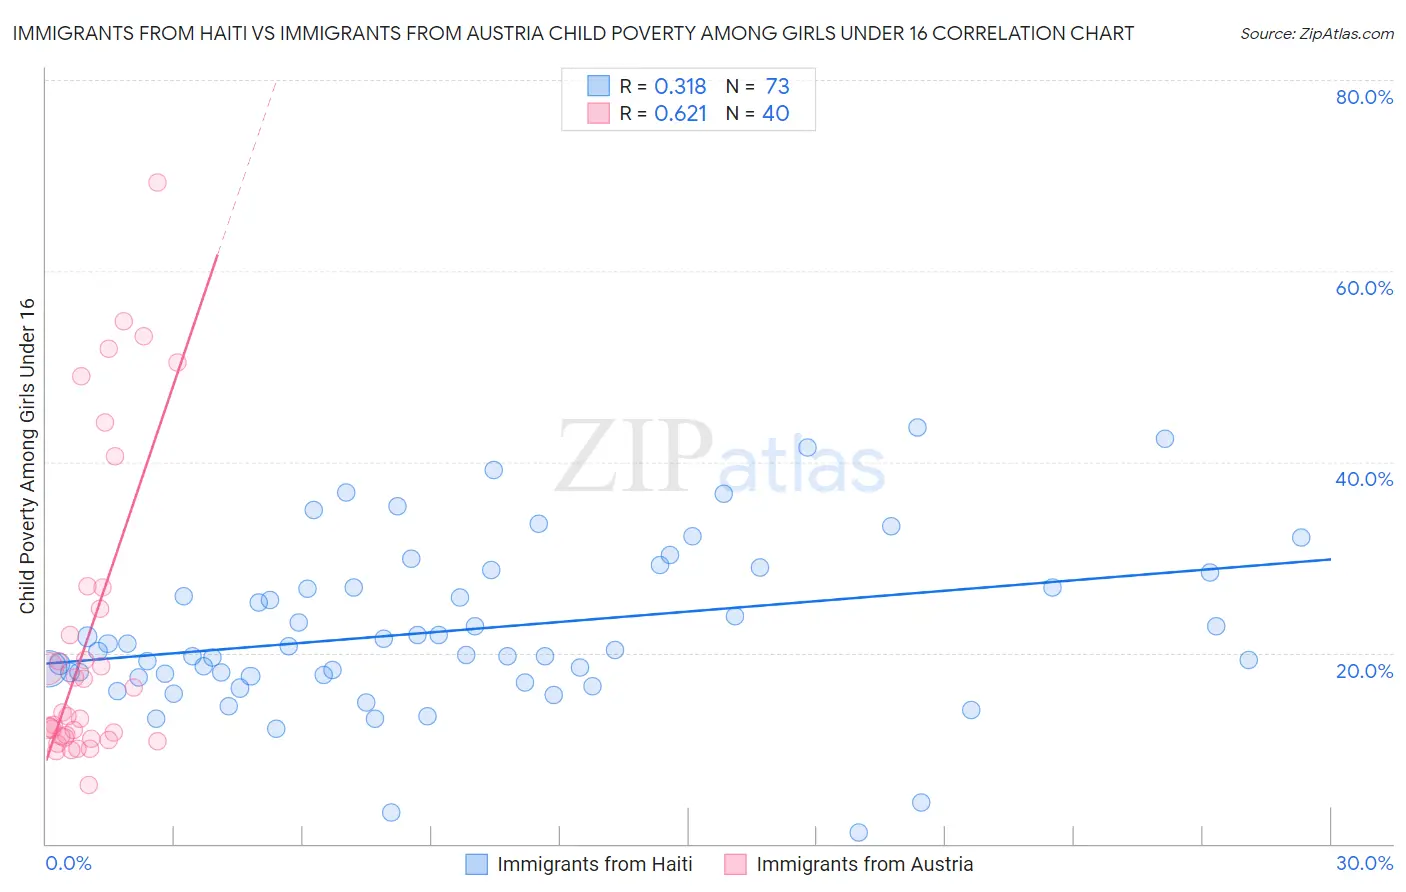 Immigrants from Haiti vs Immigrants from Austria Child Poverty Among Girls Under 16